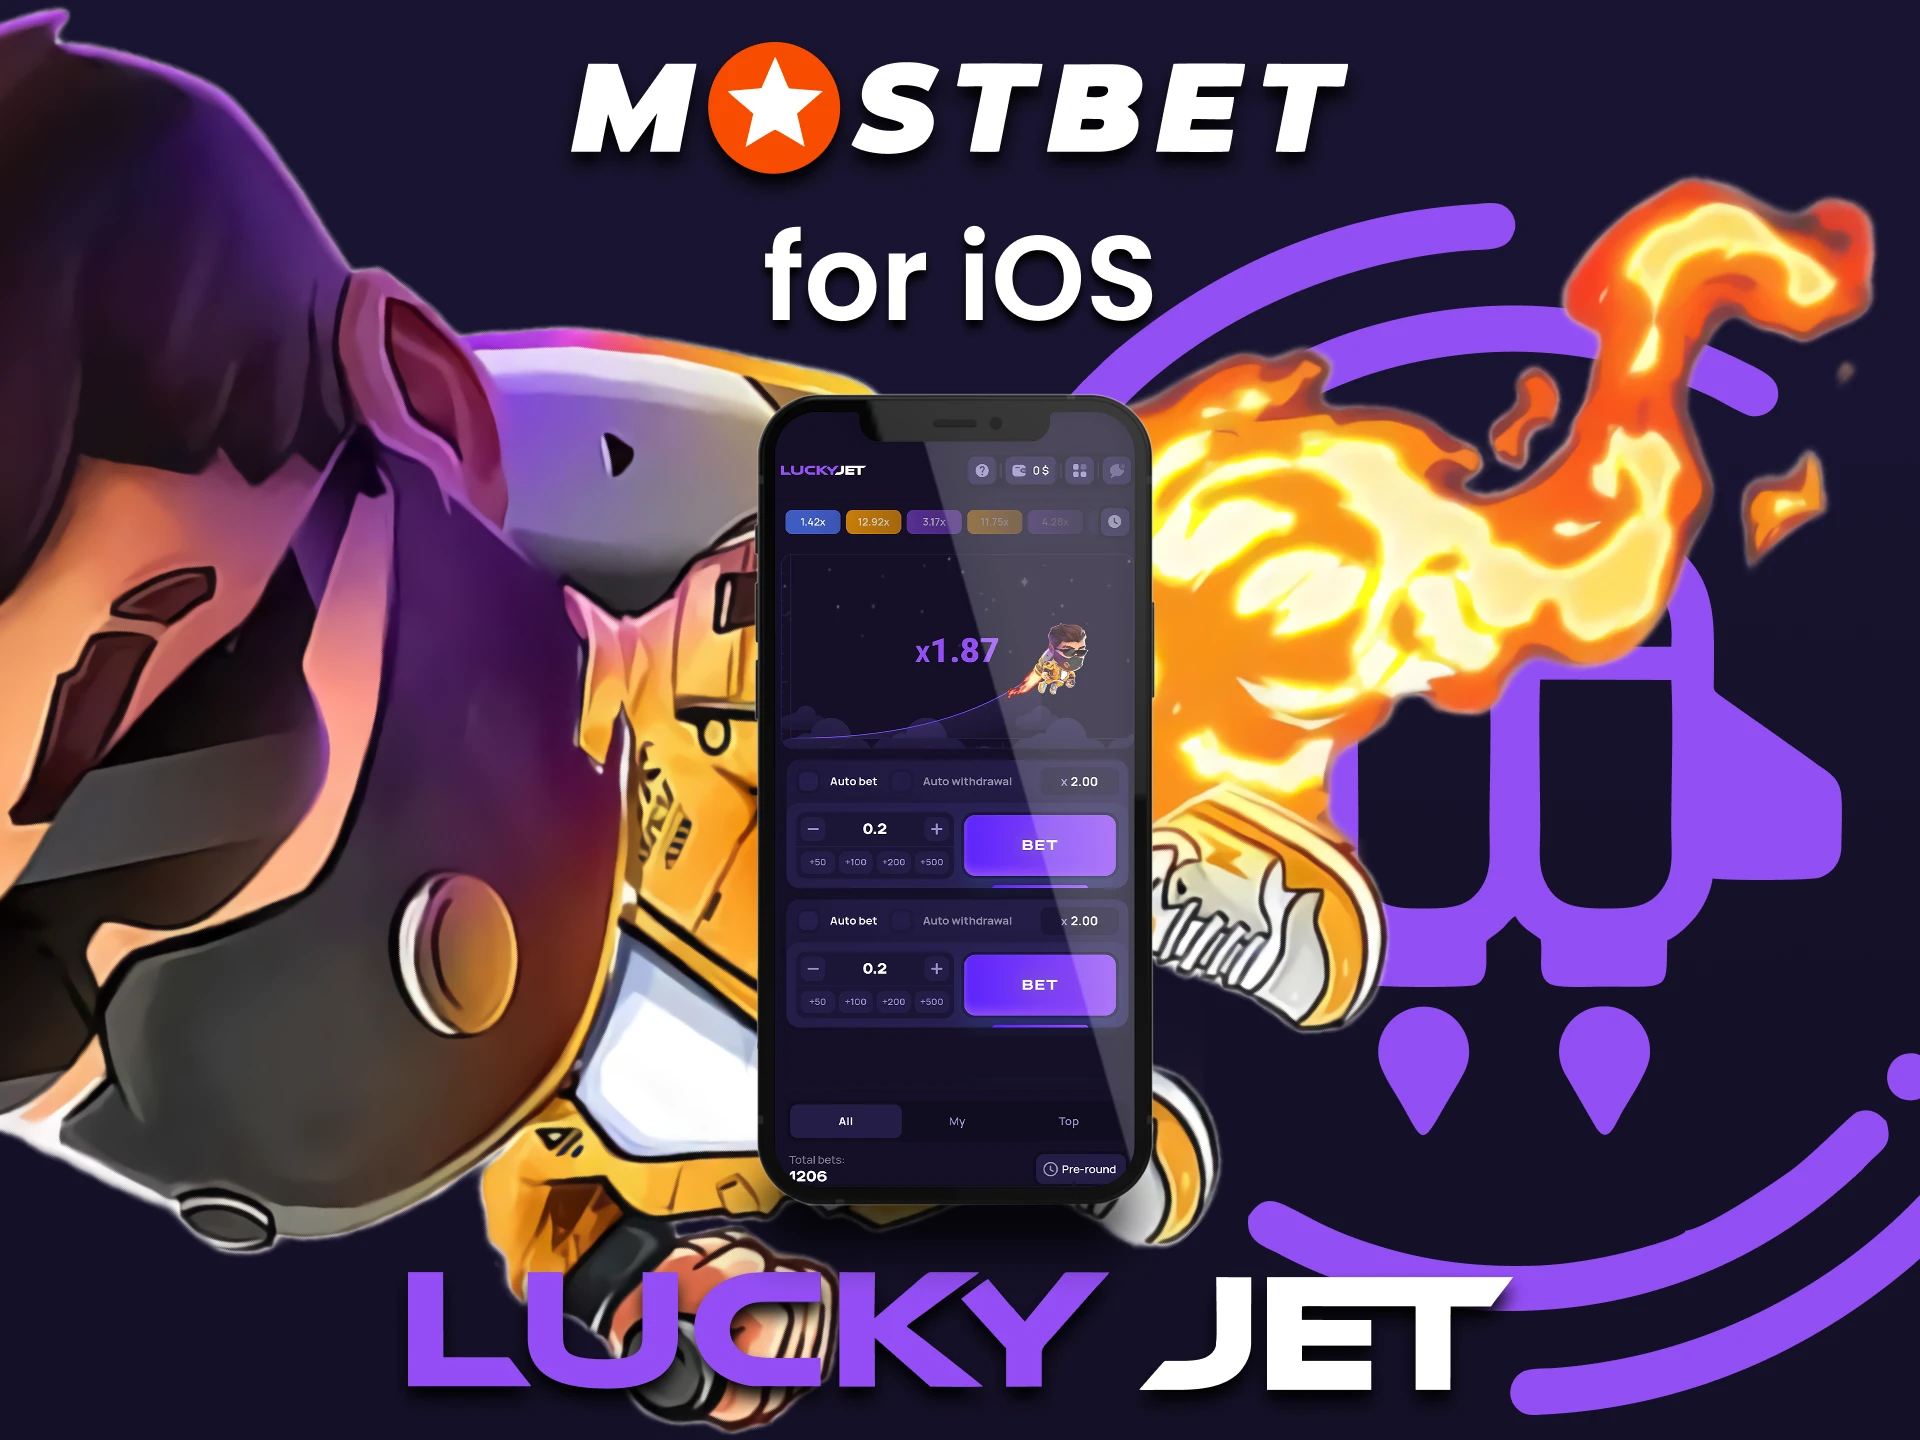 Use the Mostbet app on iOS to play Lucky Jet.